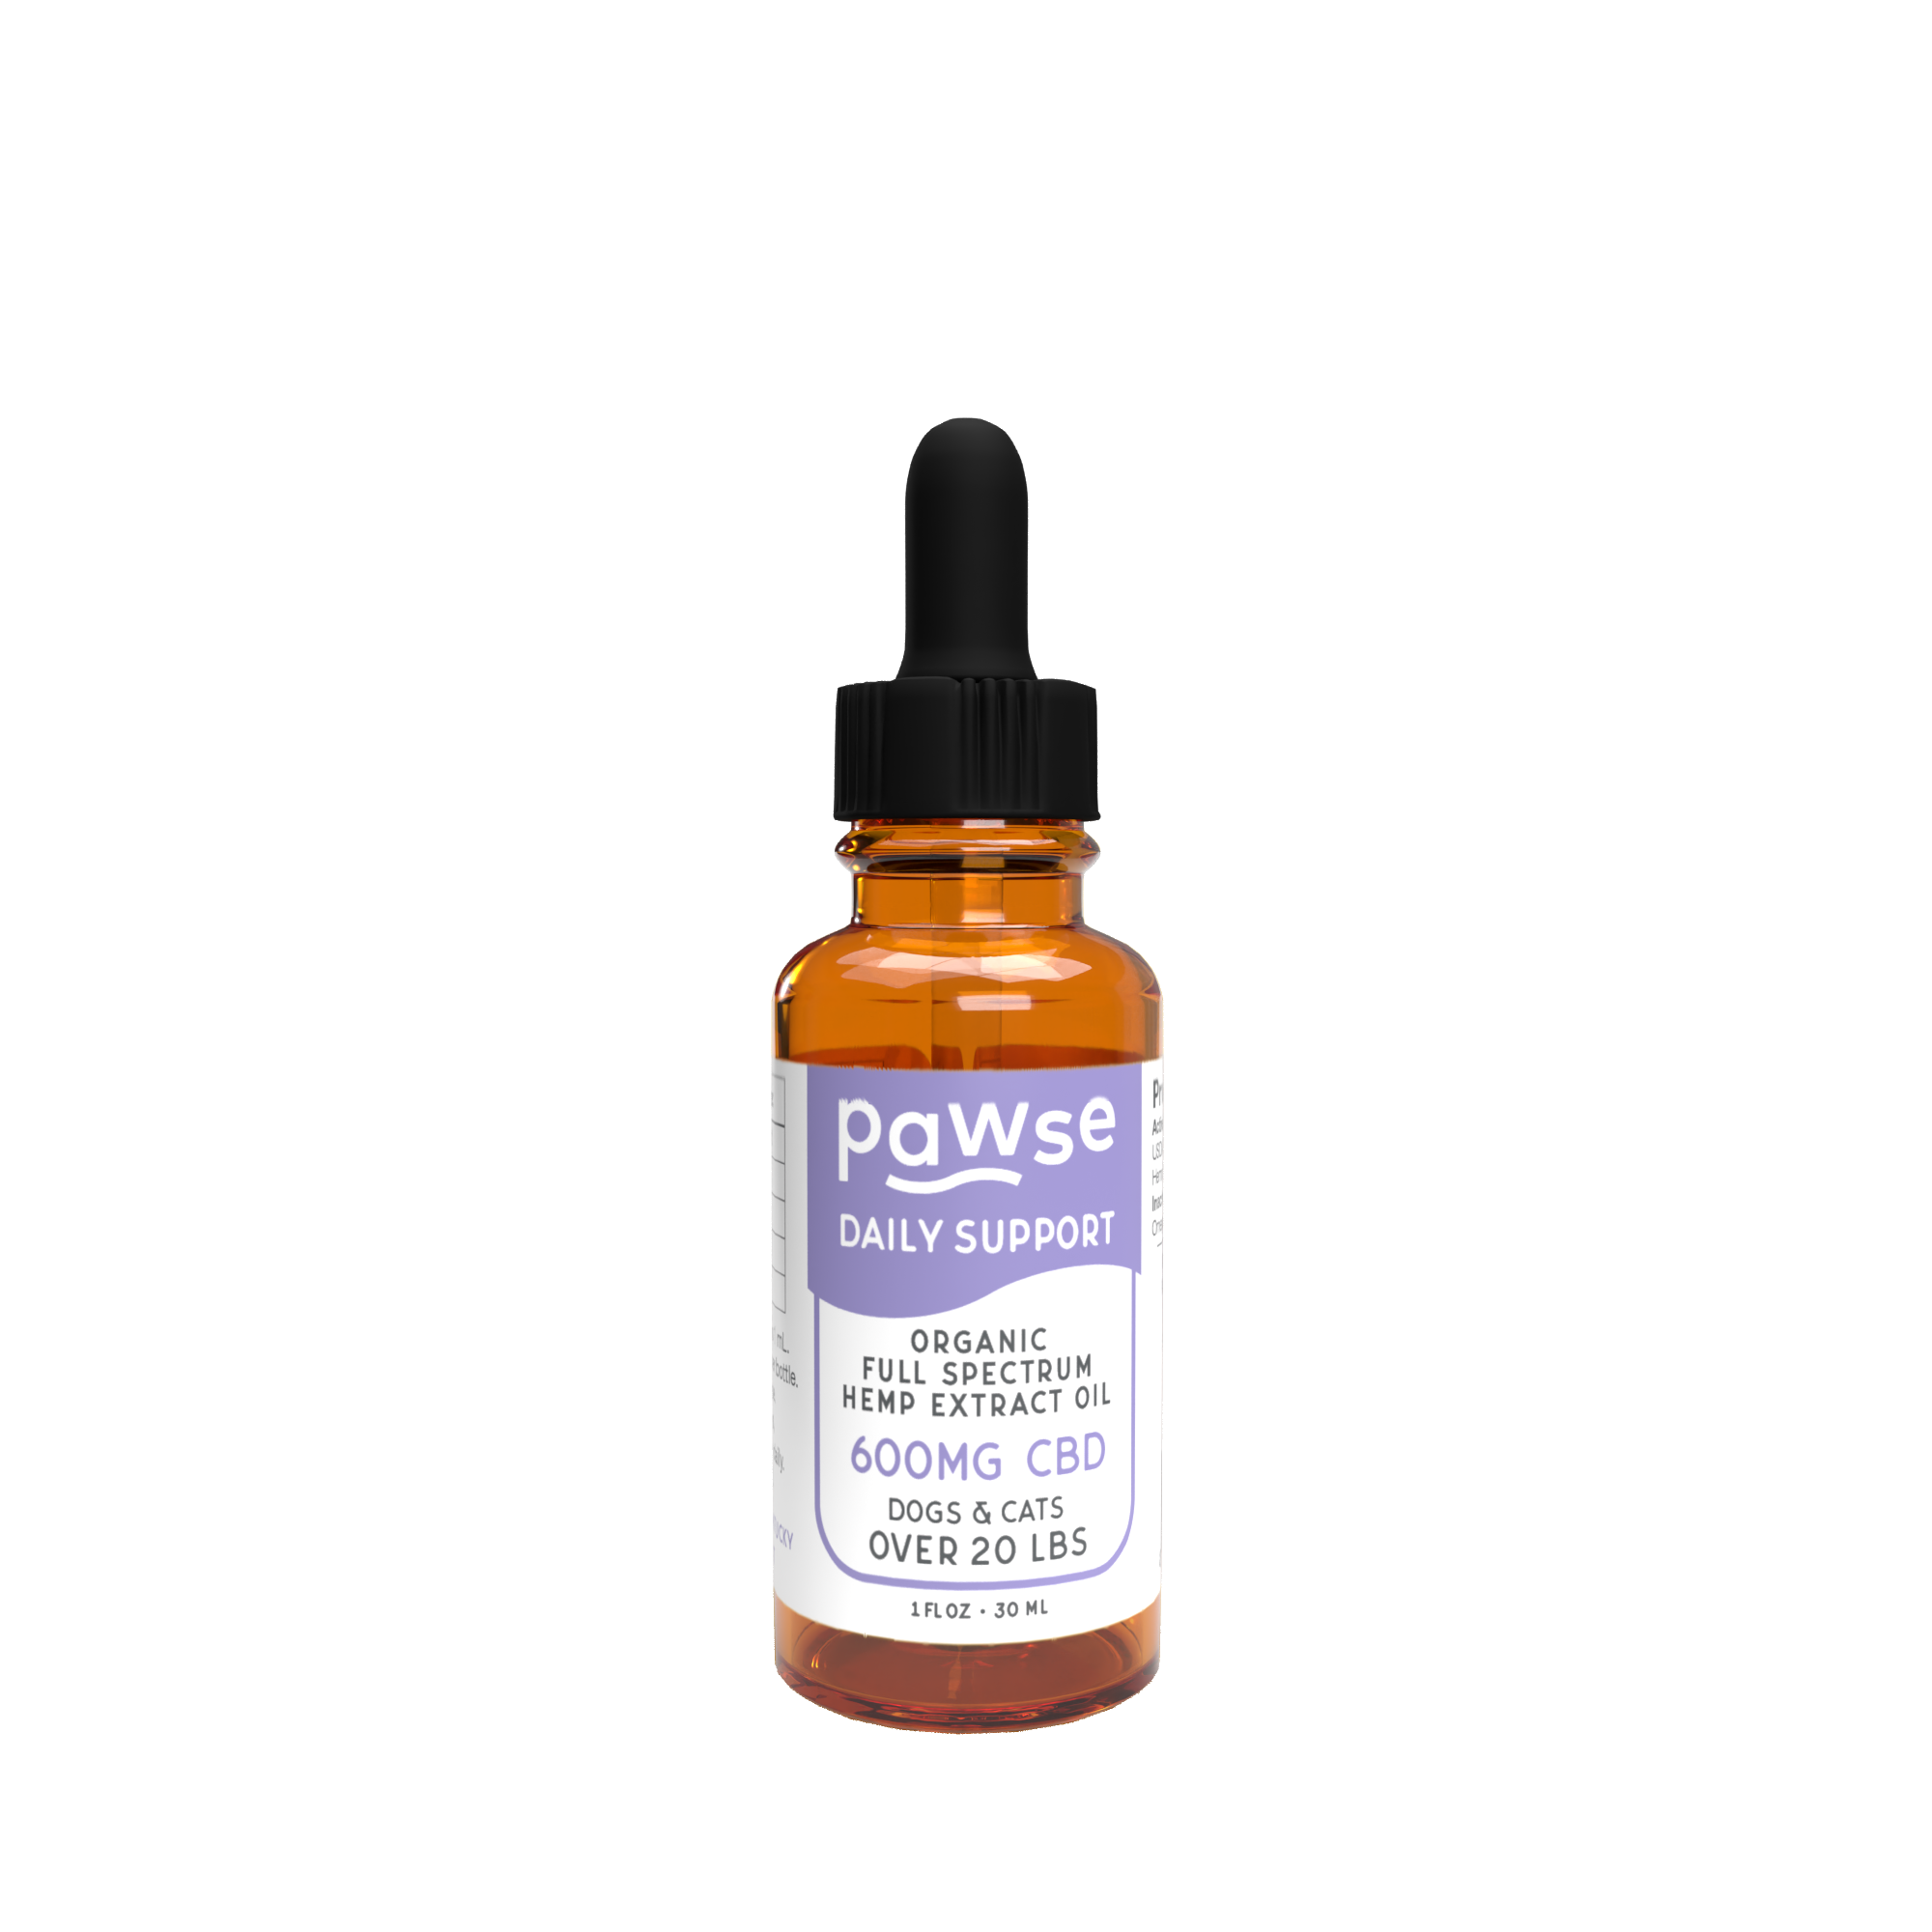 Daily Support CBD Oil for Pets Over 20lbs